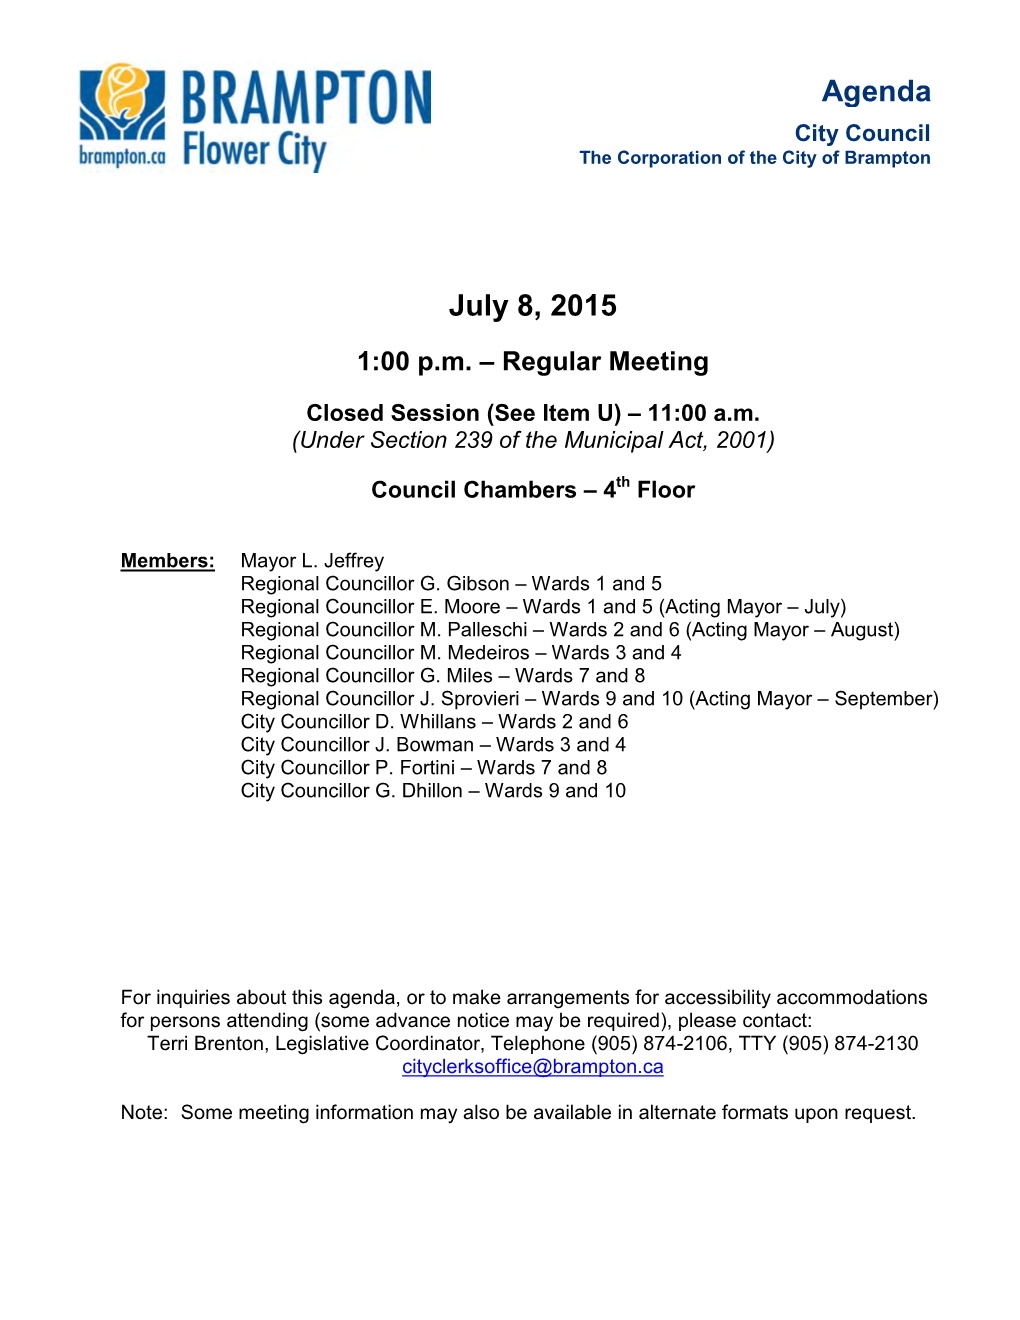 City Council Agenda for July 8, 2015